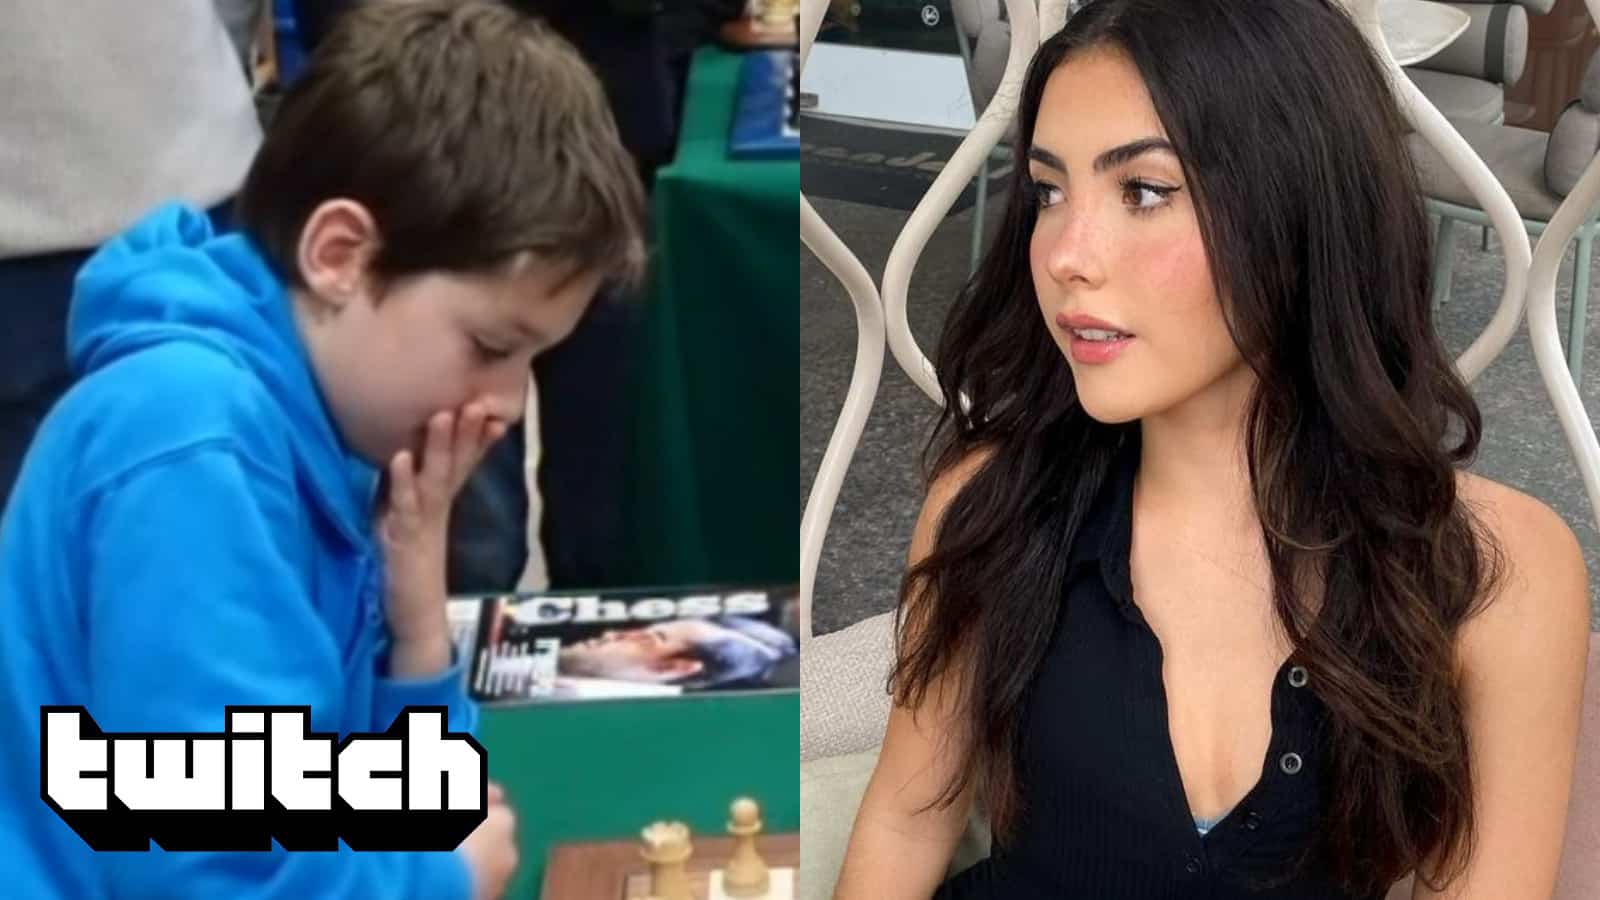 Andrea Botez stunned after 9-year-old kid checkmates her on Twitch chess  tour - Dexerto